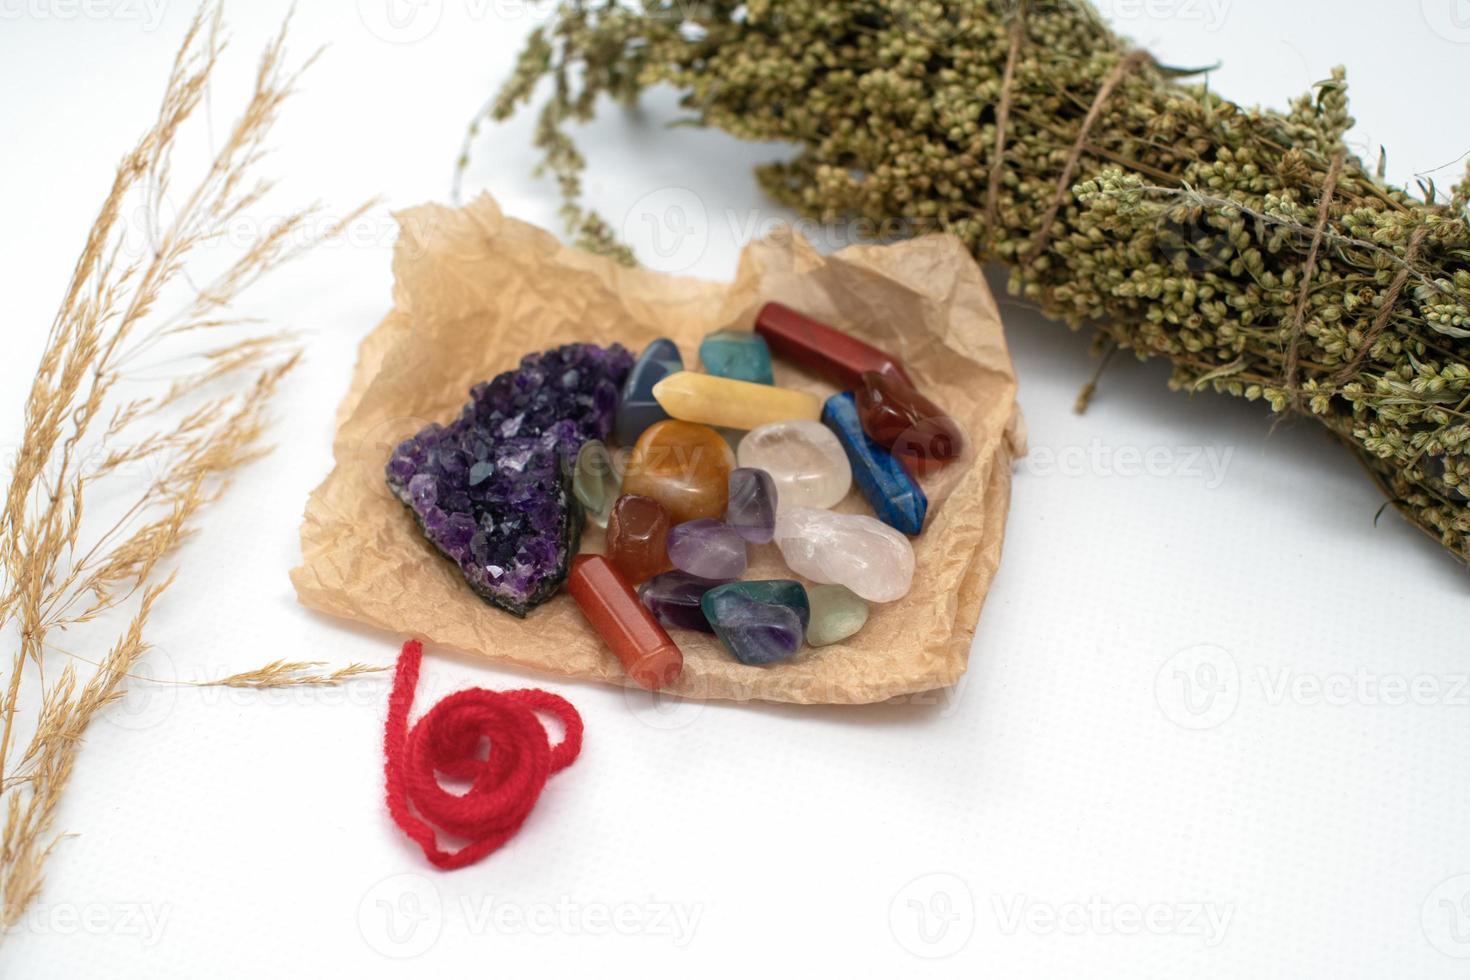 Various  crystals for healing, magical practices, minerals for esoteric spiritual practice, Healing Crystal Ritual, Witchcraft, Relax Chakra. Feng Shui, reiki therapy concept, spiritual force human photo